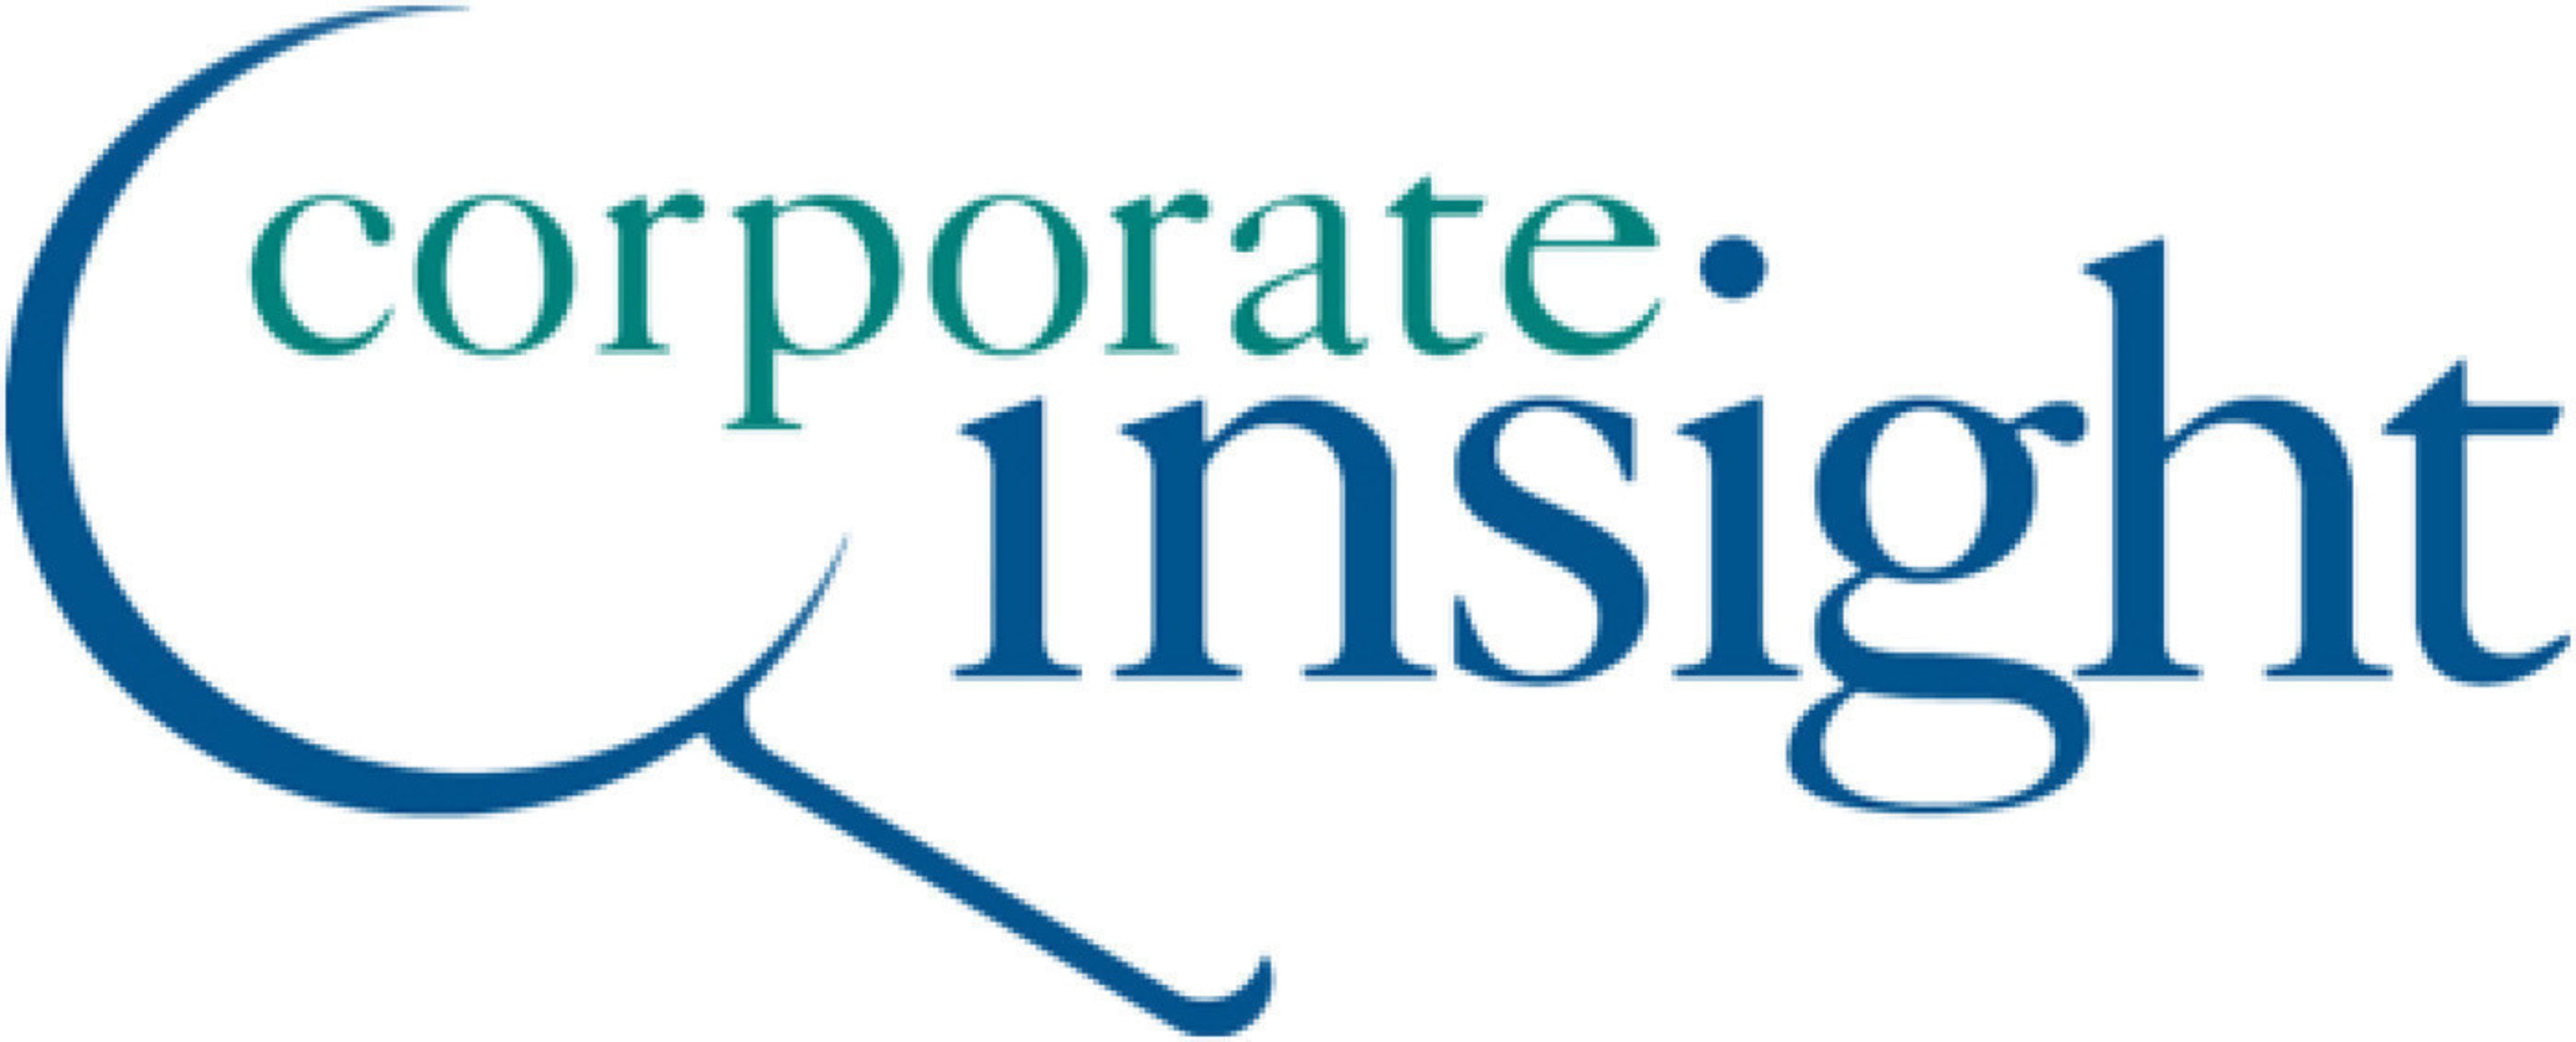 Corporate Insight provides competitive intelligence, consulting and user experience research to the nation's leading financial institutions. For more than two decades, the firm has tracked technological developments in the financial services industry, identifying best practices in online banking and investing, online insurance, mobile finance, active trading platforms, social media and other emerging areas. The firm helps its clients to remain at the forefront of industry trends and improve their competitive position. Learn more at www.corporateinsight.com/about-us. Connect with us on Facebook, Twitter (CInsight) and LinkedIn.